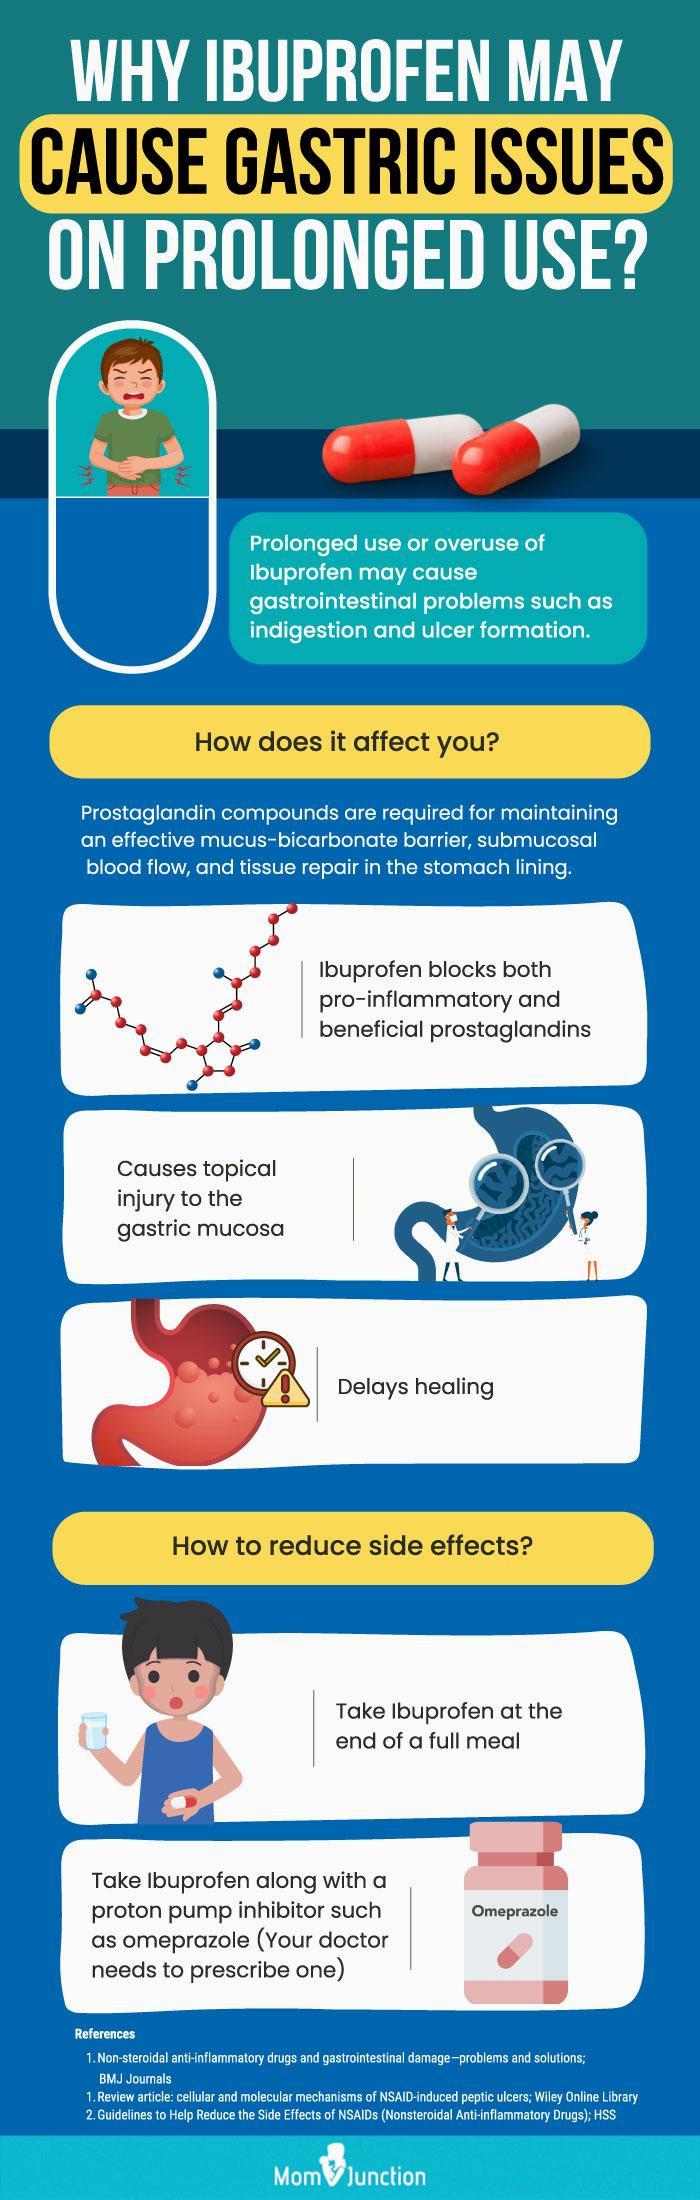 This infographic explains how prolonged or excessive use of ibuprofen can cause gastric issues such as indigestion and ulcer formation.